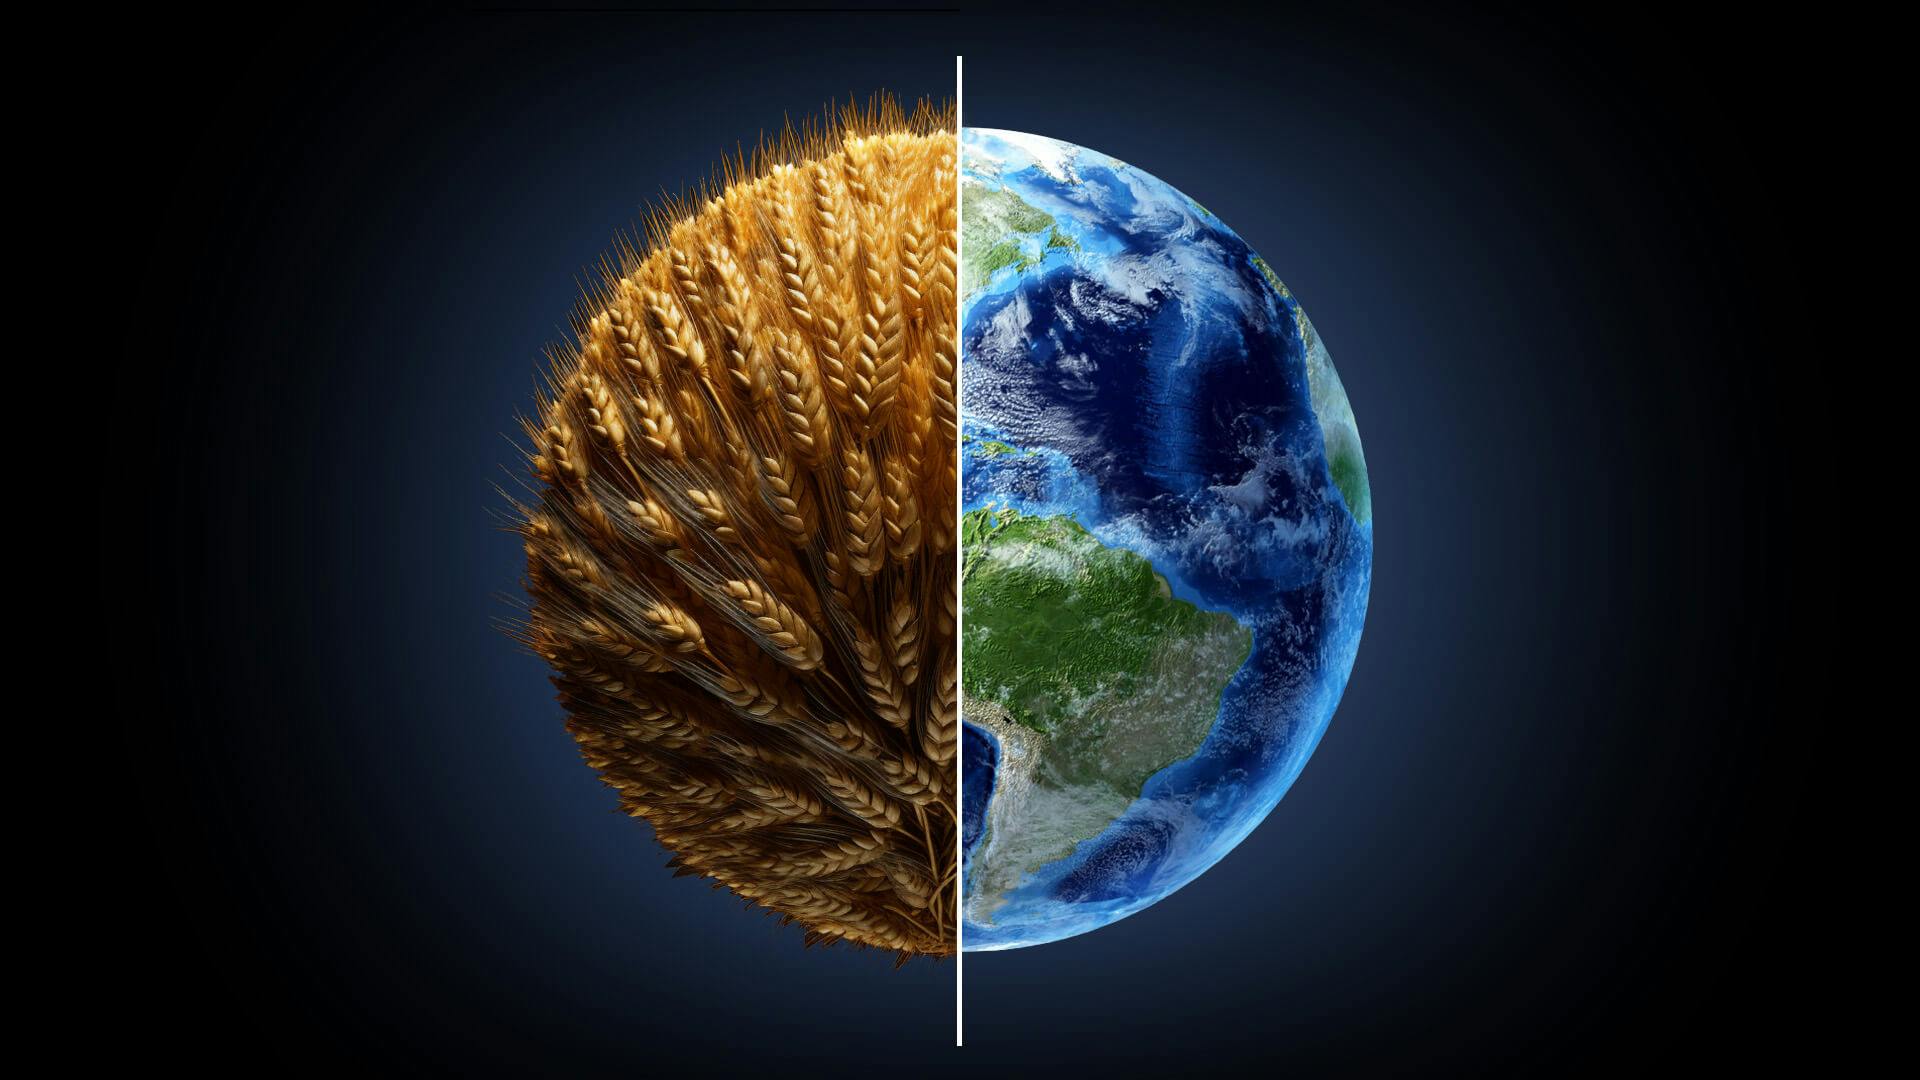 An image of earth is shown, but cut down the middle. On one side is earth, and on the other is sprouts of wheat in a circular design to make up the other side of the world.